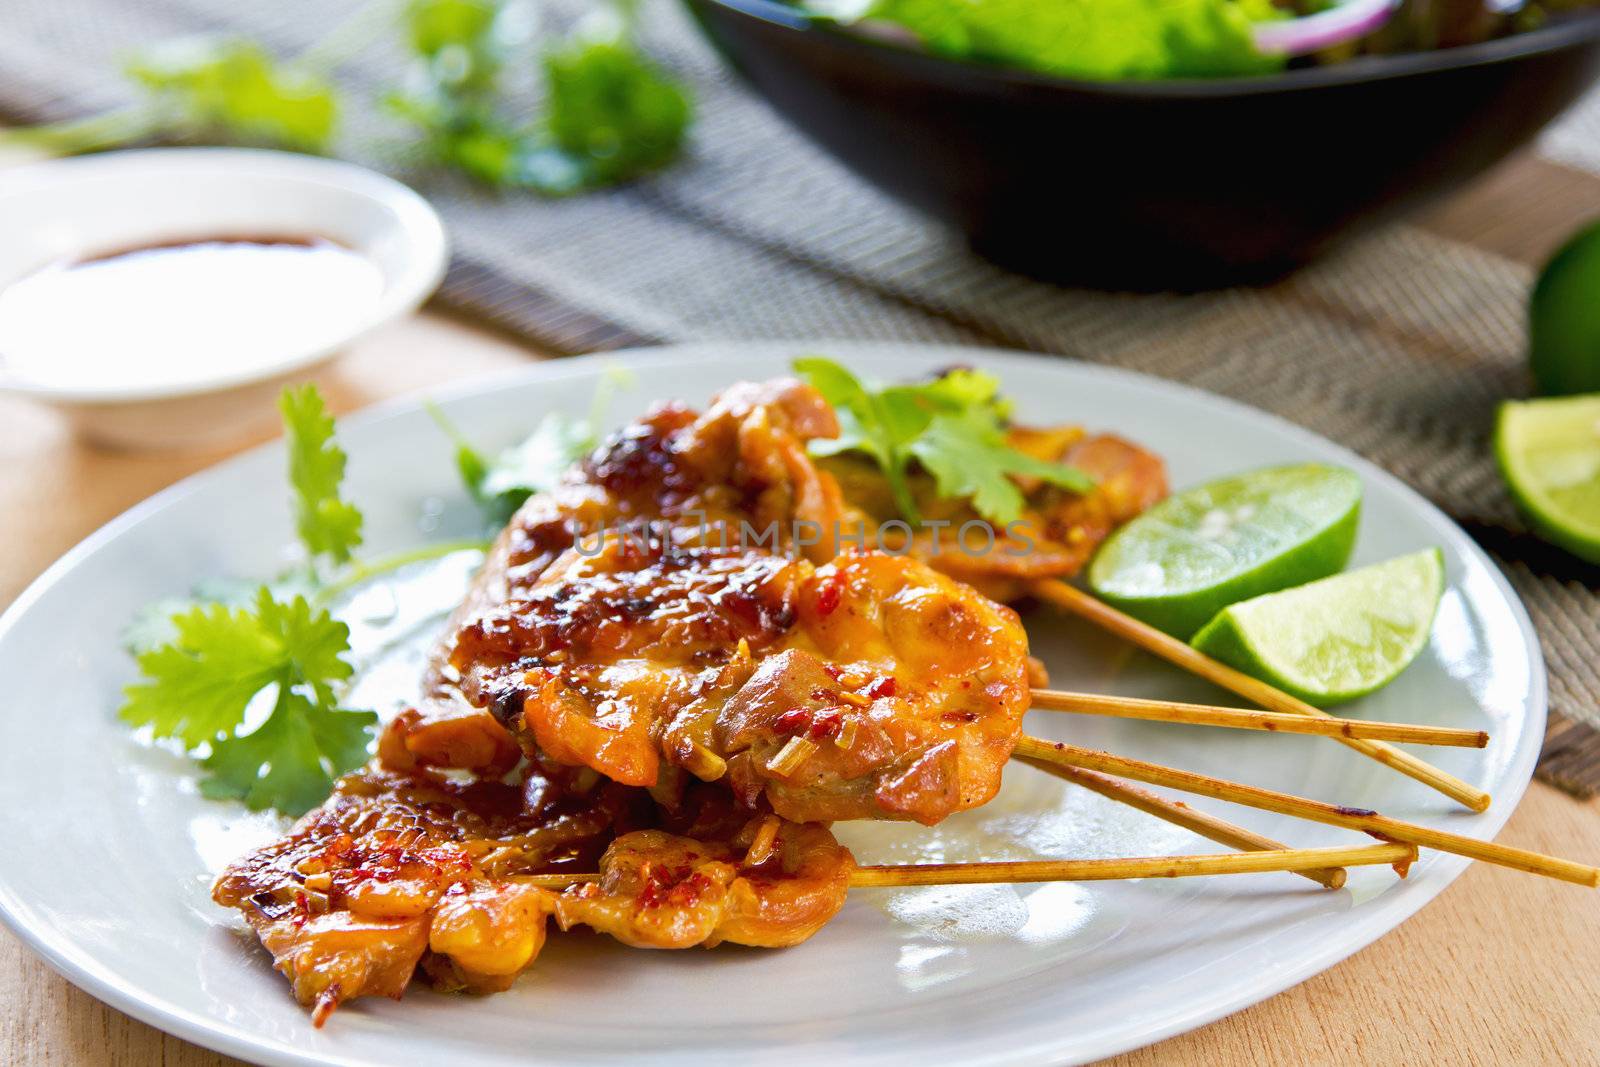 Grilled chicken with chili sauce by vanillaechoes